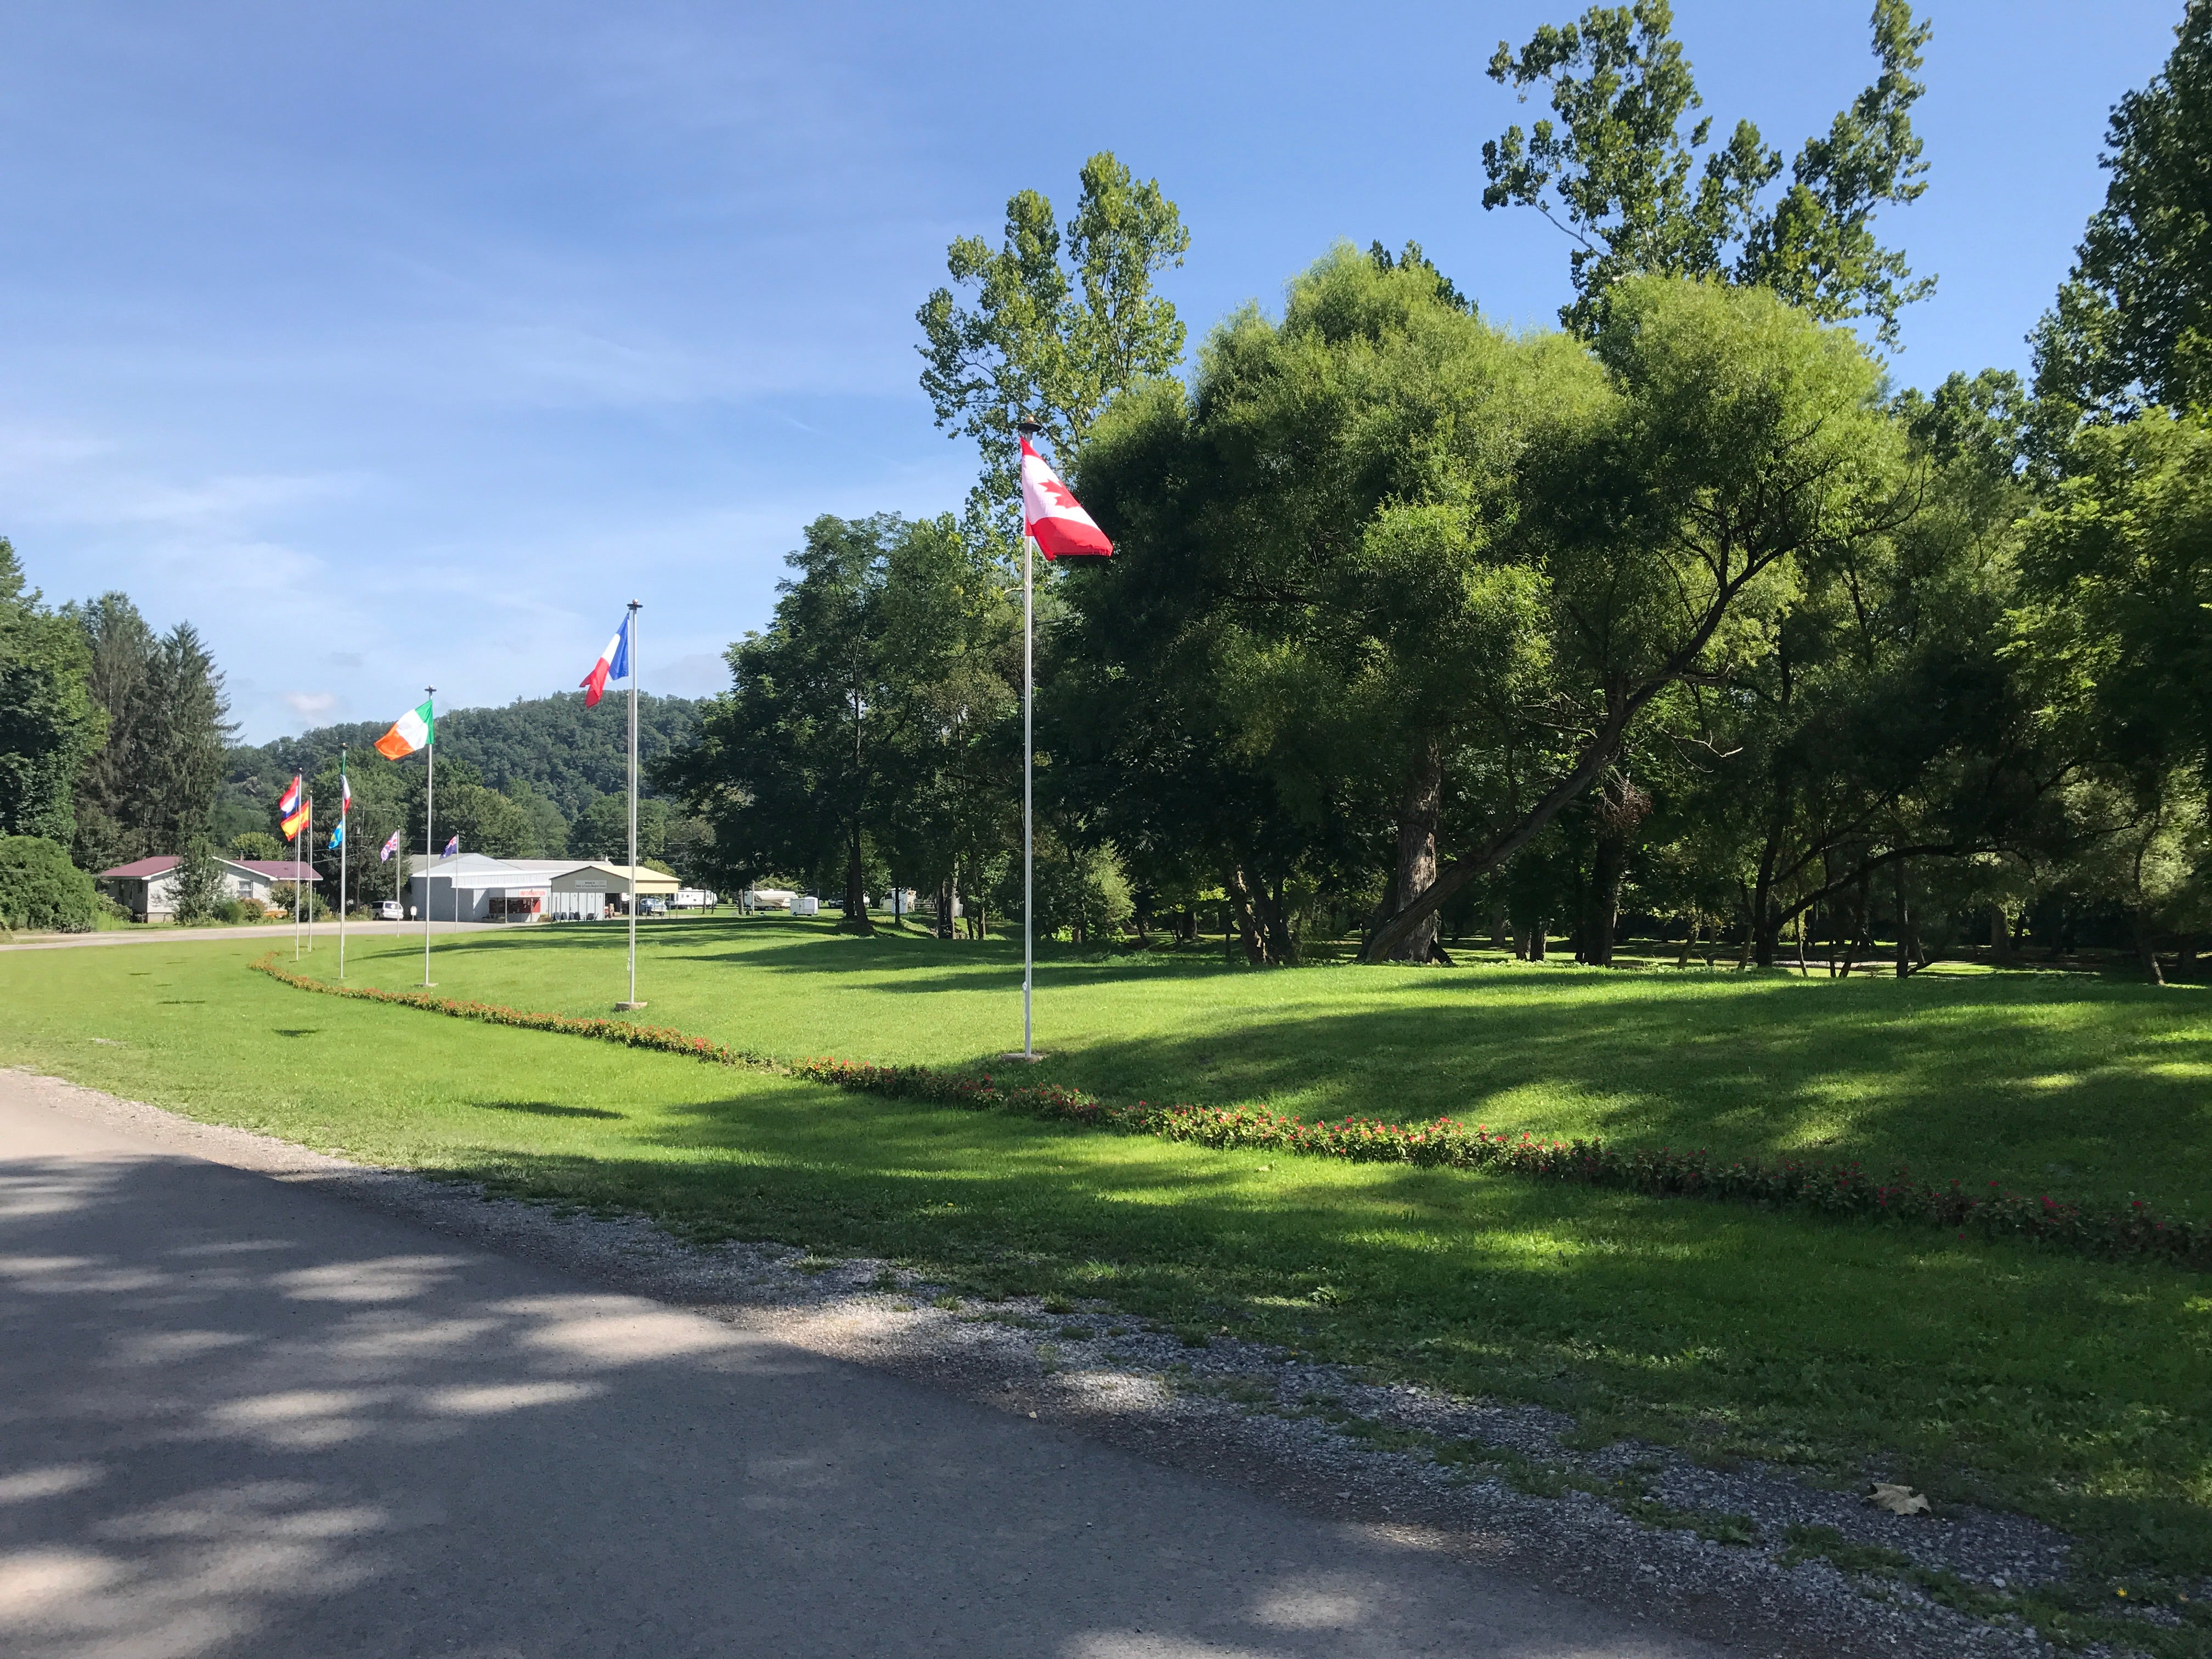 Campground entrance drive. Flags represent the different countries that attend the Bluegrass Festival.